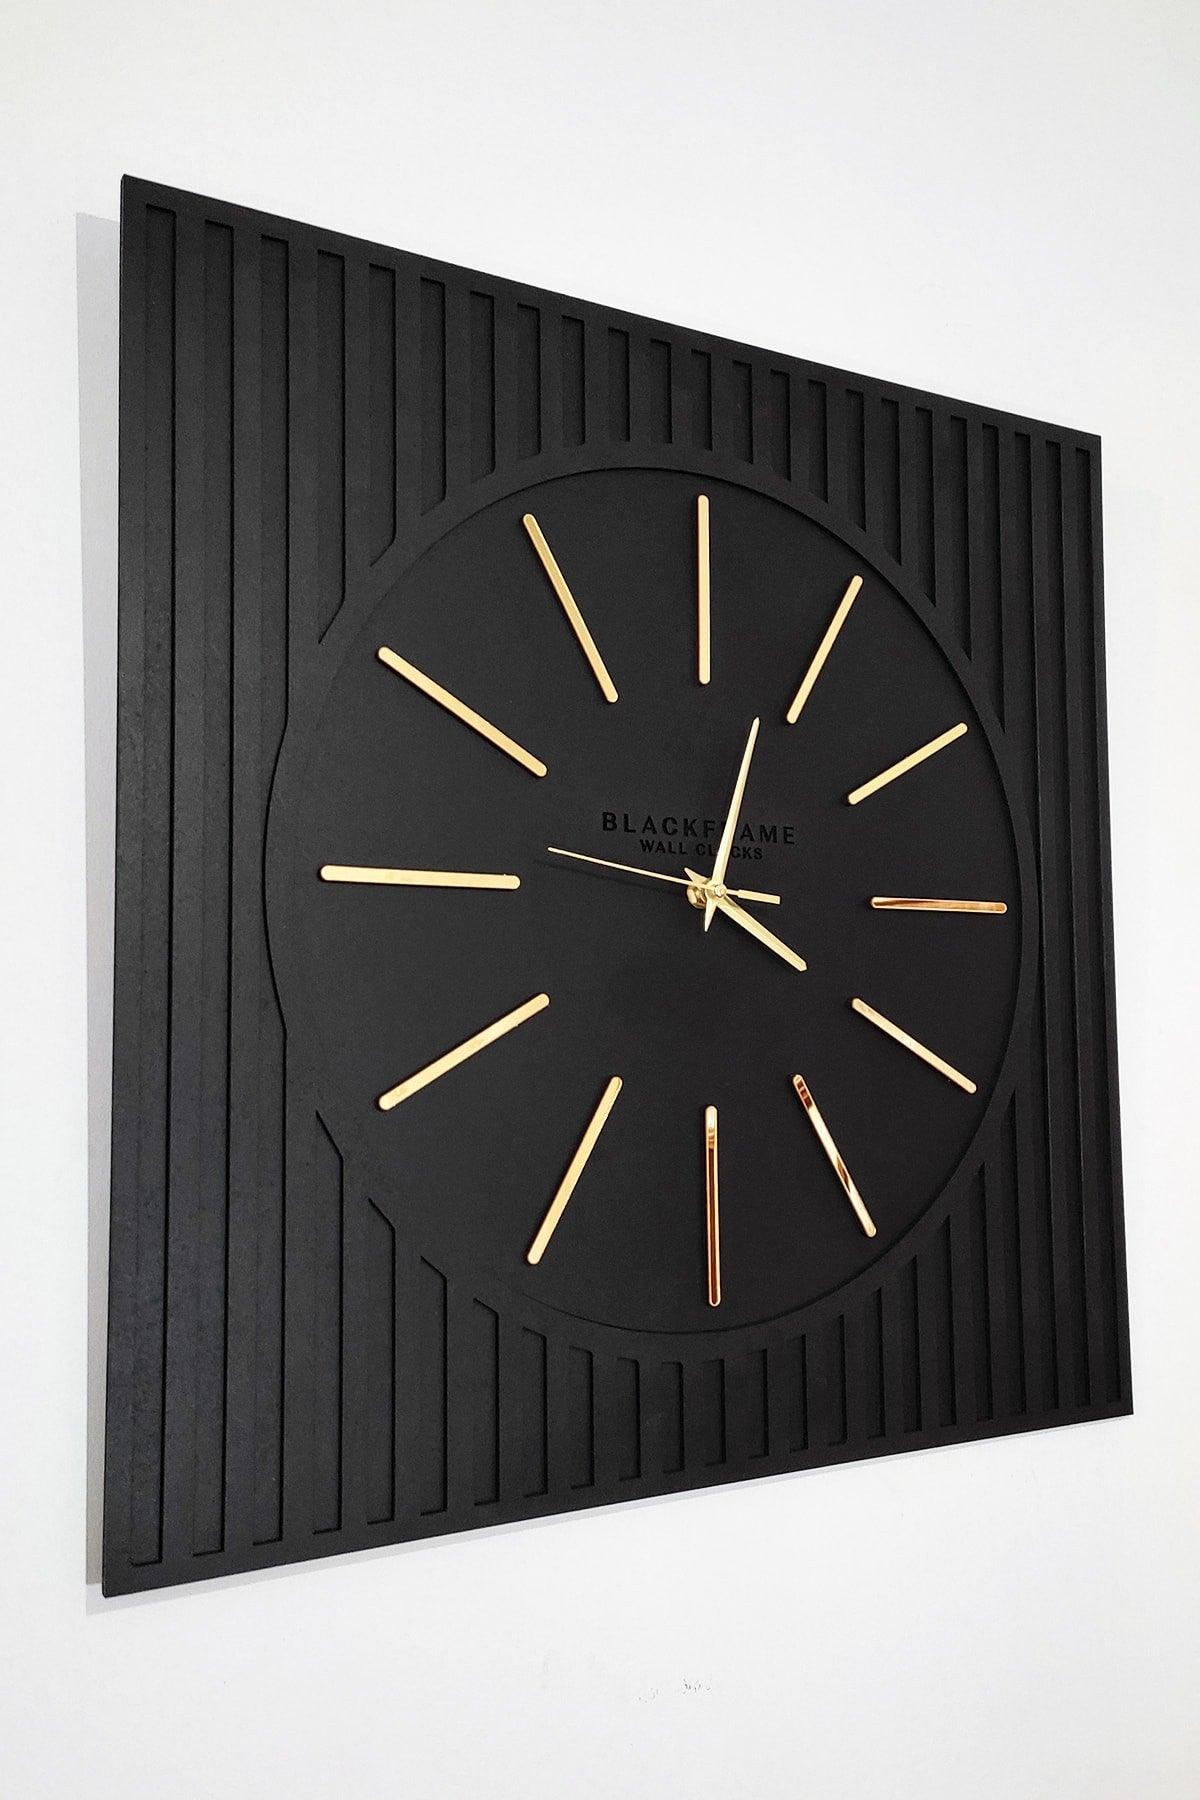 - Lines Effects Series Special Design Wall Clock - Black & Gold - 50x50cm - Swordslife